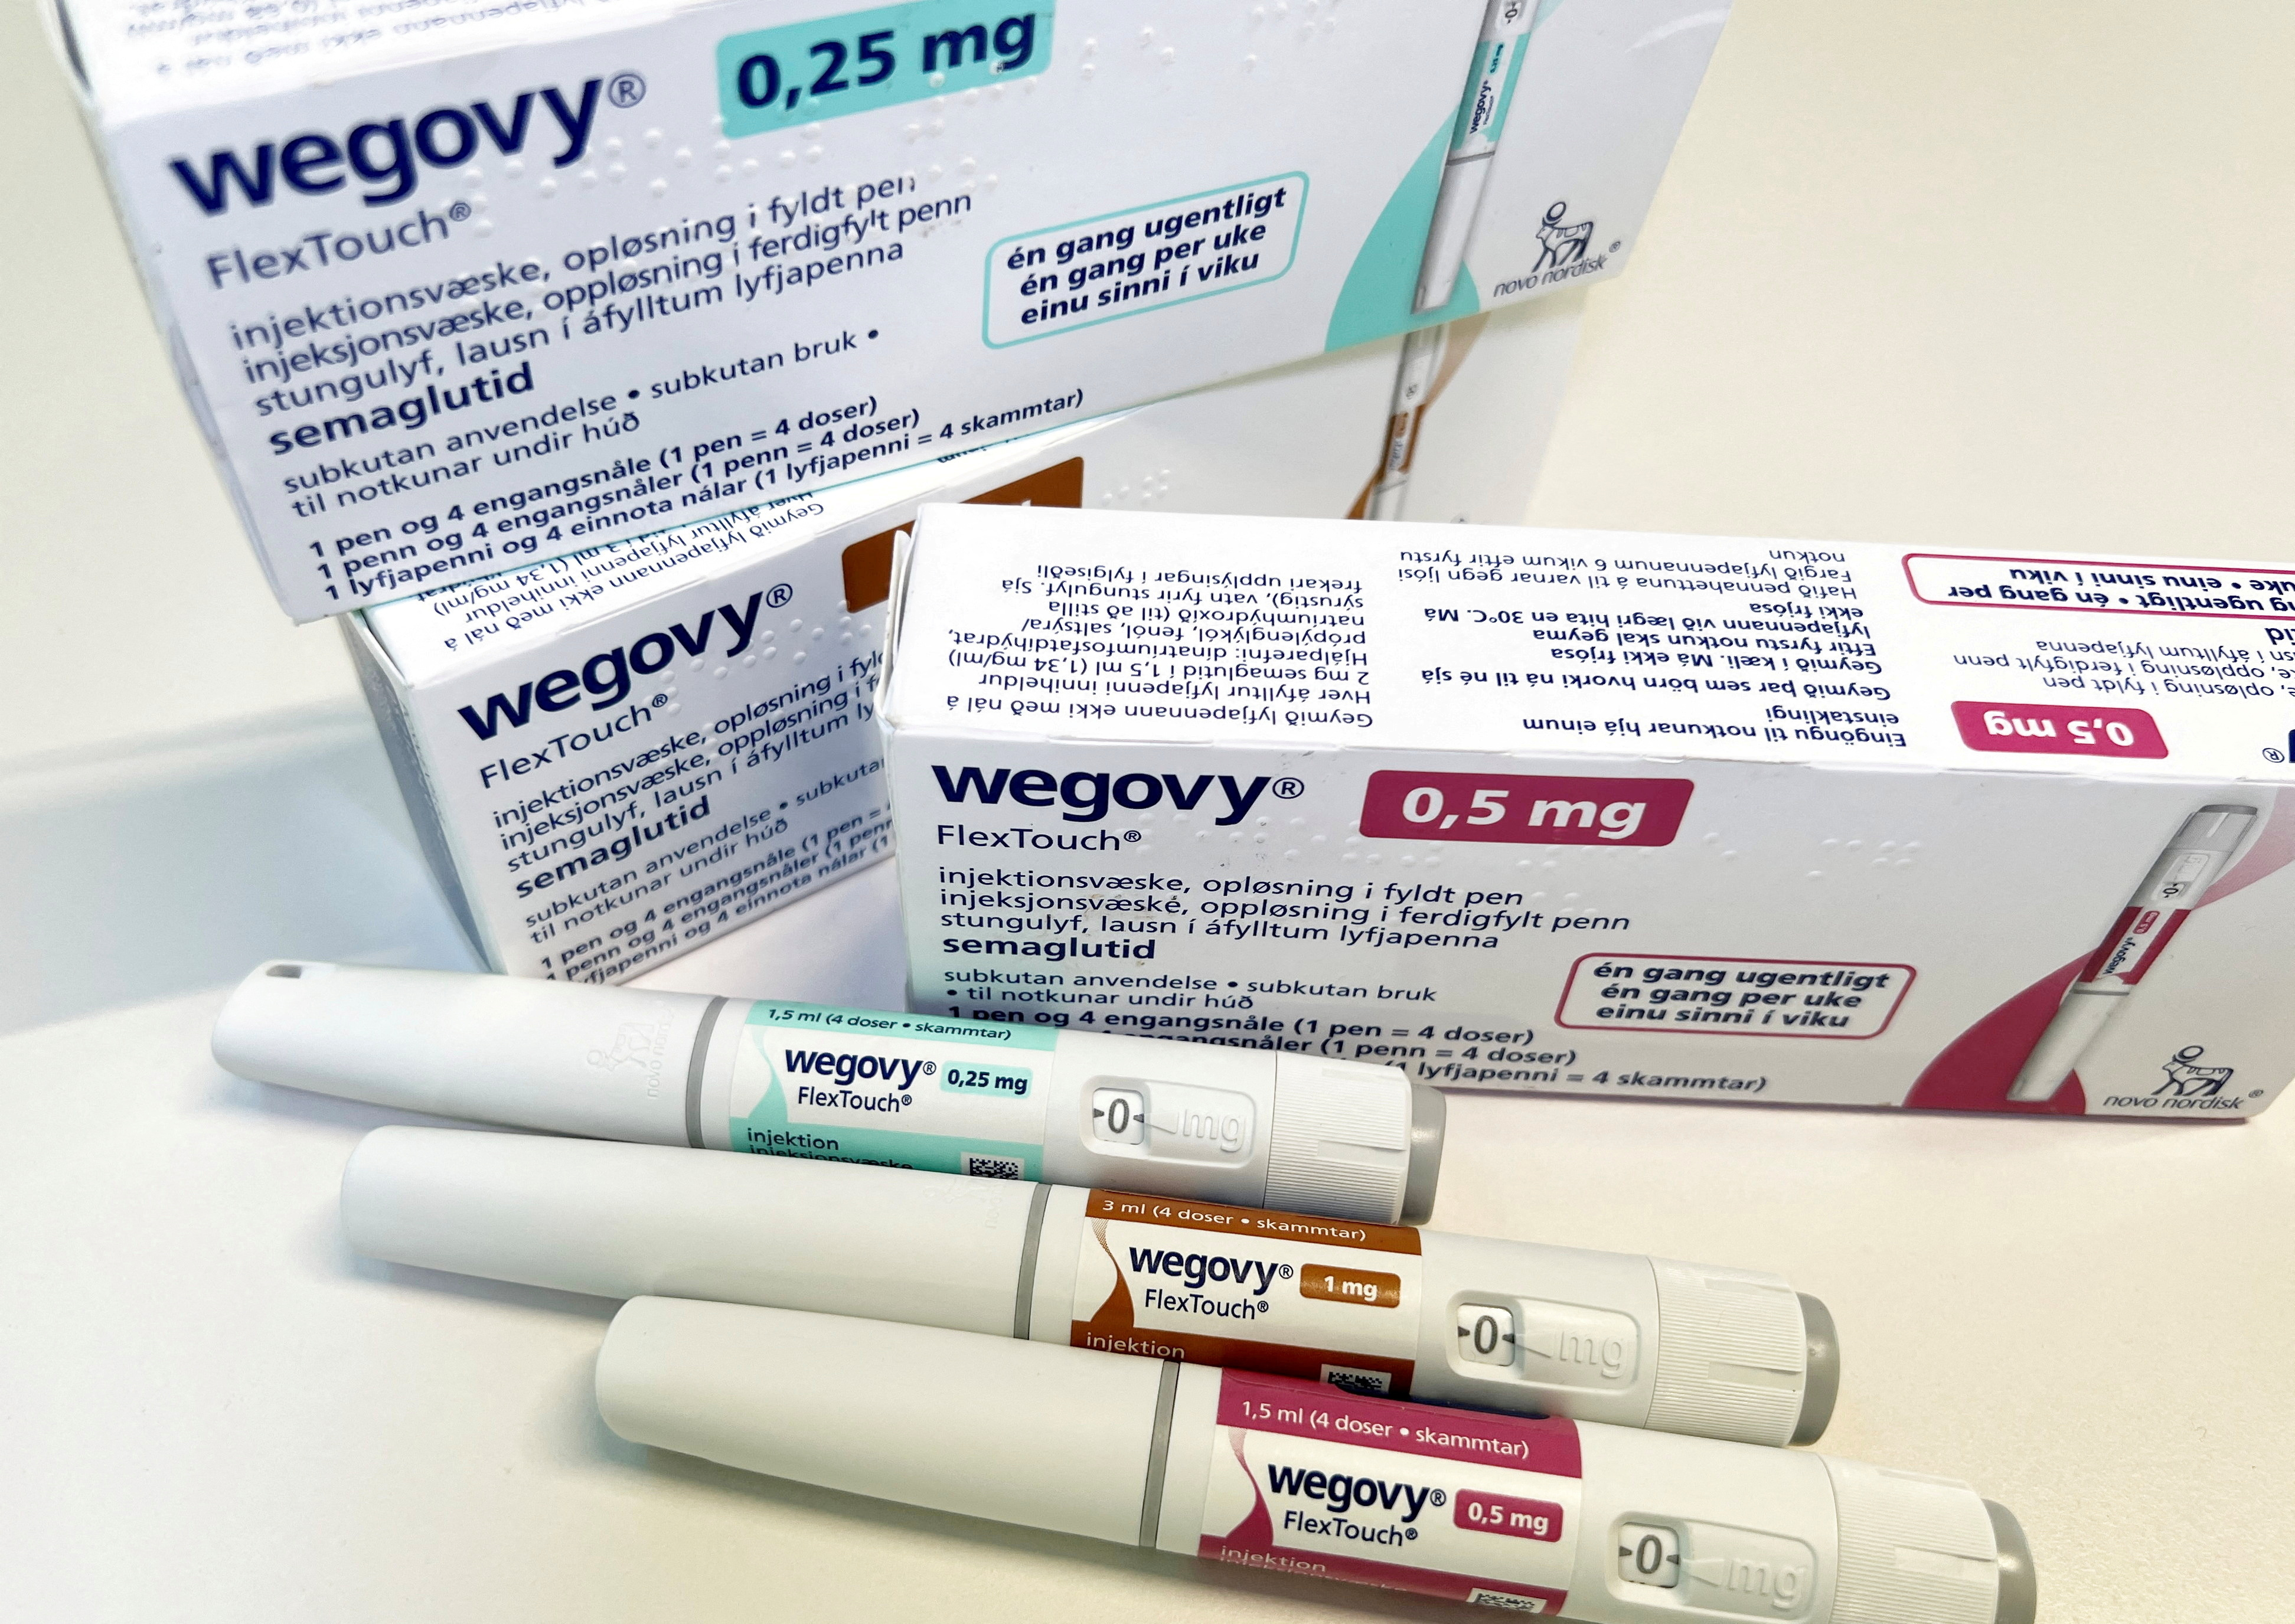 Injection pens and boxes of Novo Nordisk's weight-loss drug Wegovy are shown in this photo illustration in Oslo